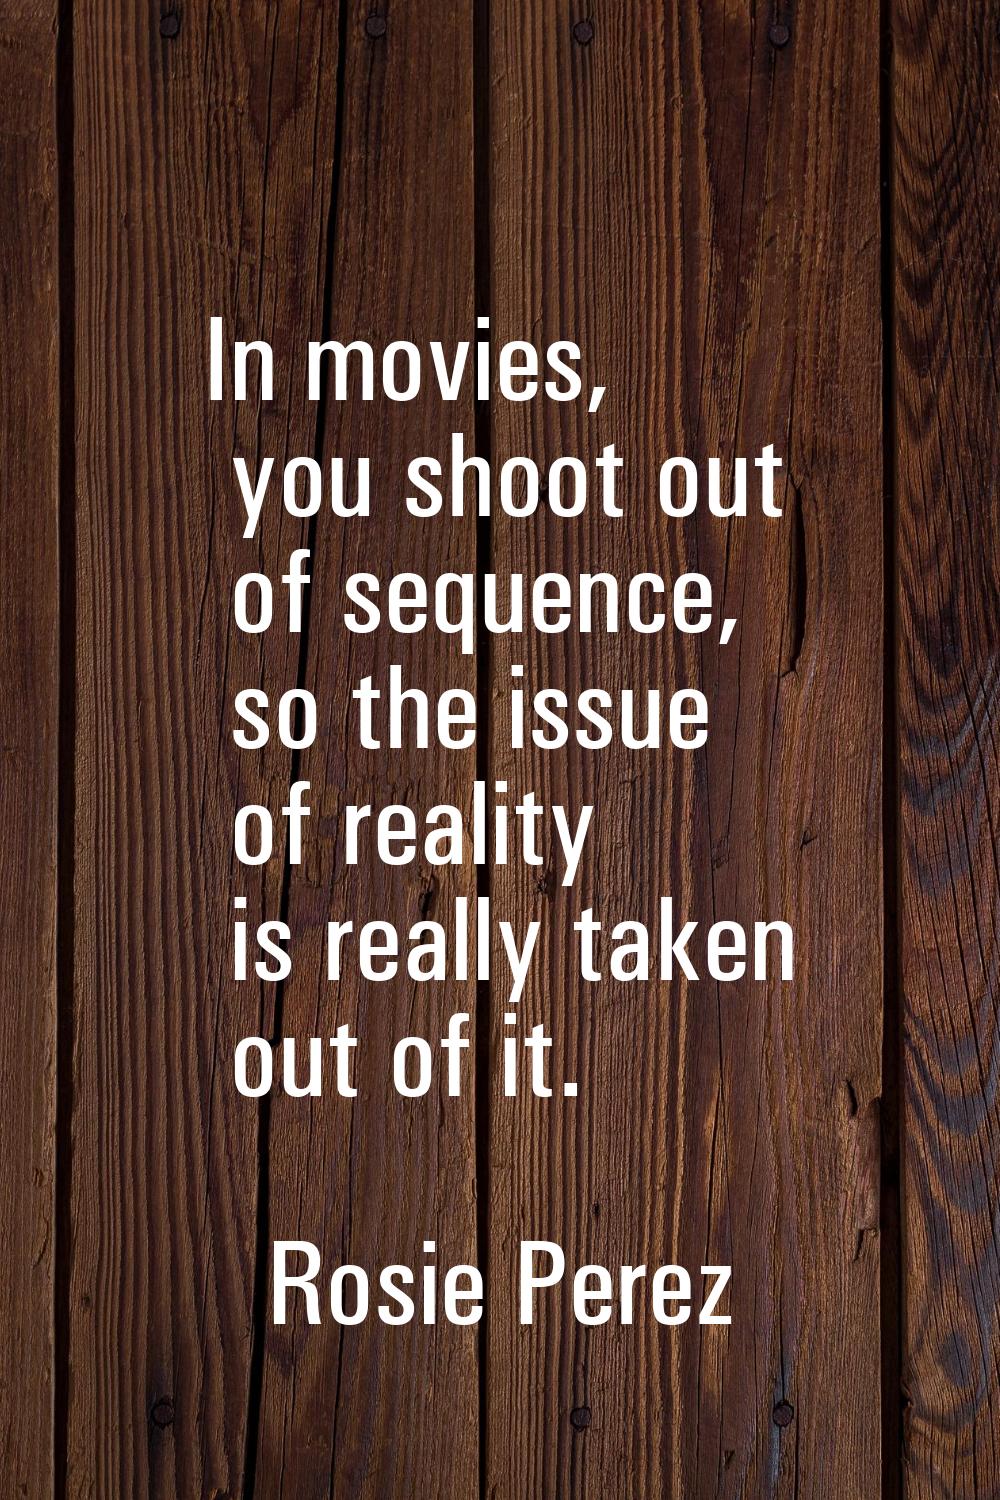 In movies, you shoot out of sequence, so the issue of reality is really taken out of it.